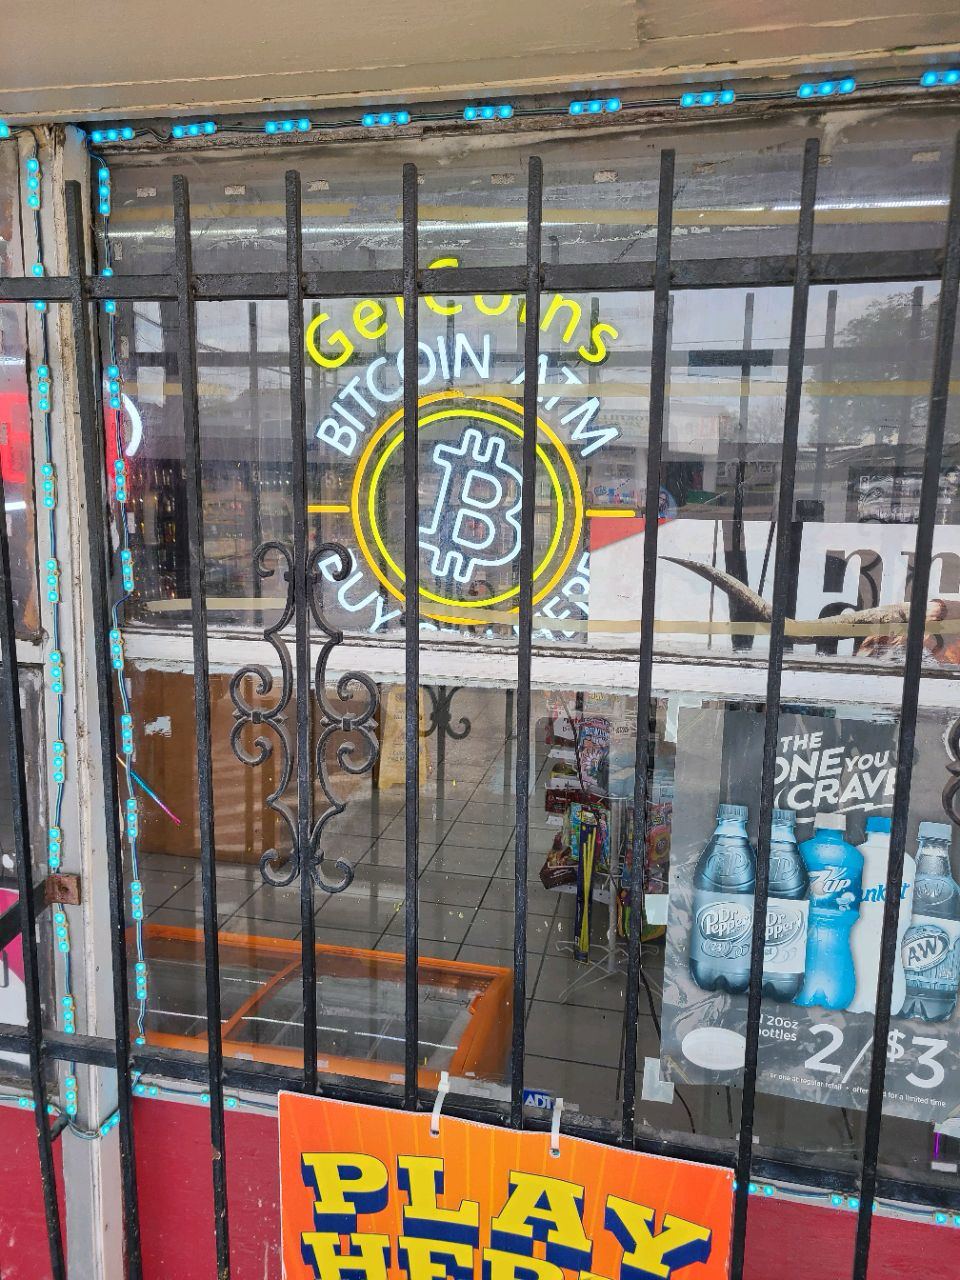 Getcoins - Bitcoin ATM - Inside of Wayside Food Mart in Houston, Texas